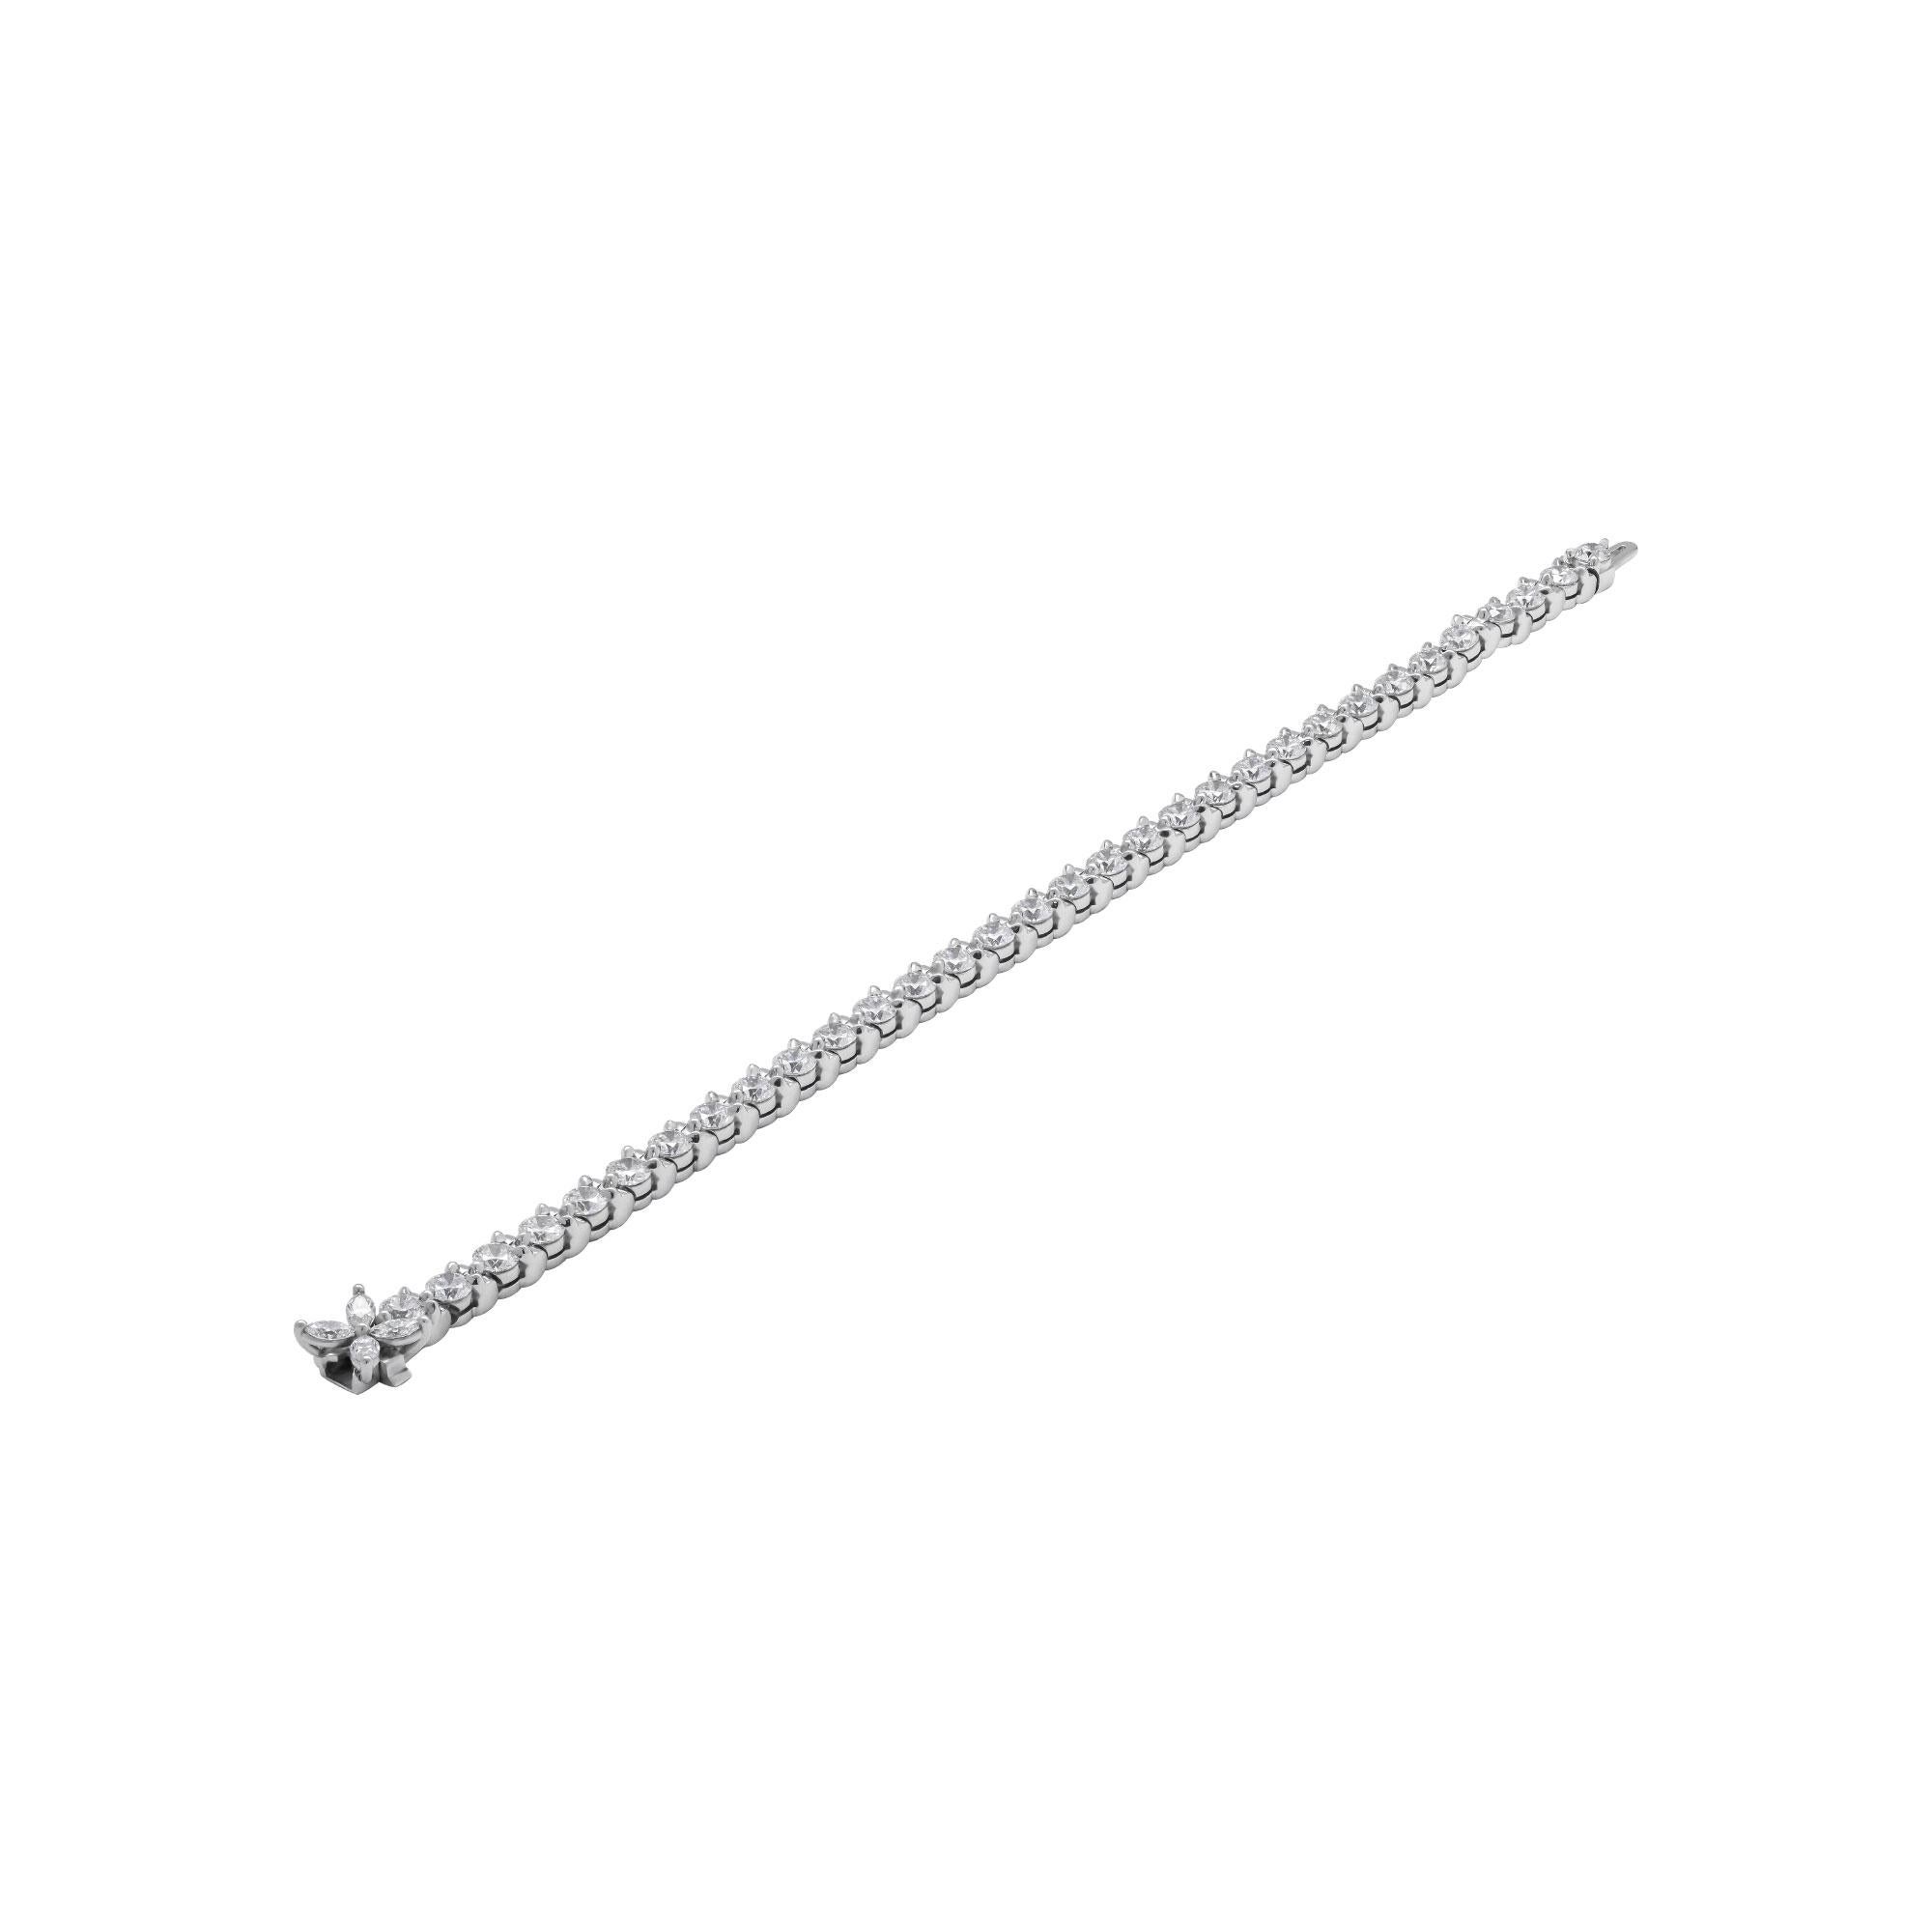 Diamond Tennis Bracelet
Timeless and classic!
Mounted in Platinum with 32 full brilliant cut round diamonds totaling 7.70ct (0.25 ct each stone) F-G color VVS clarity and 3 marquise shape diamonds on the clasp - an elegant touch - totaling 0.43ct